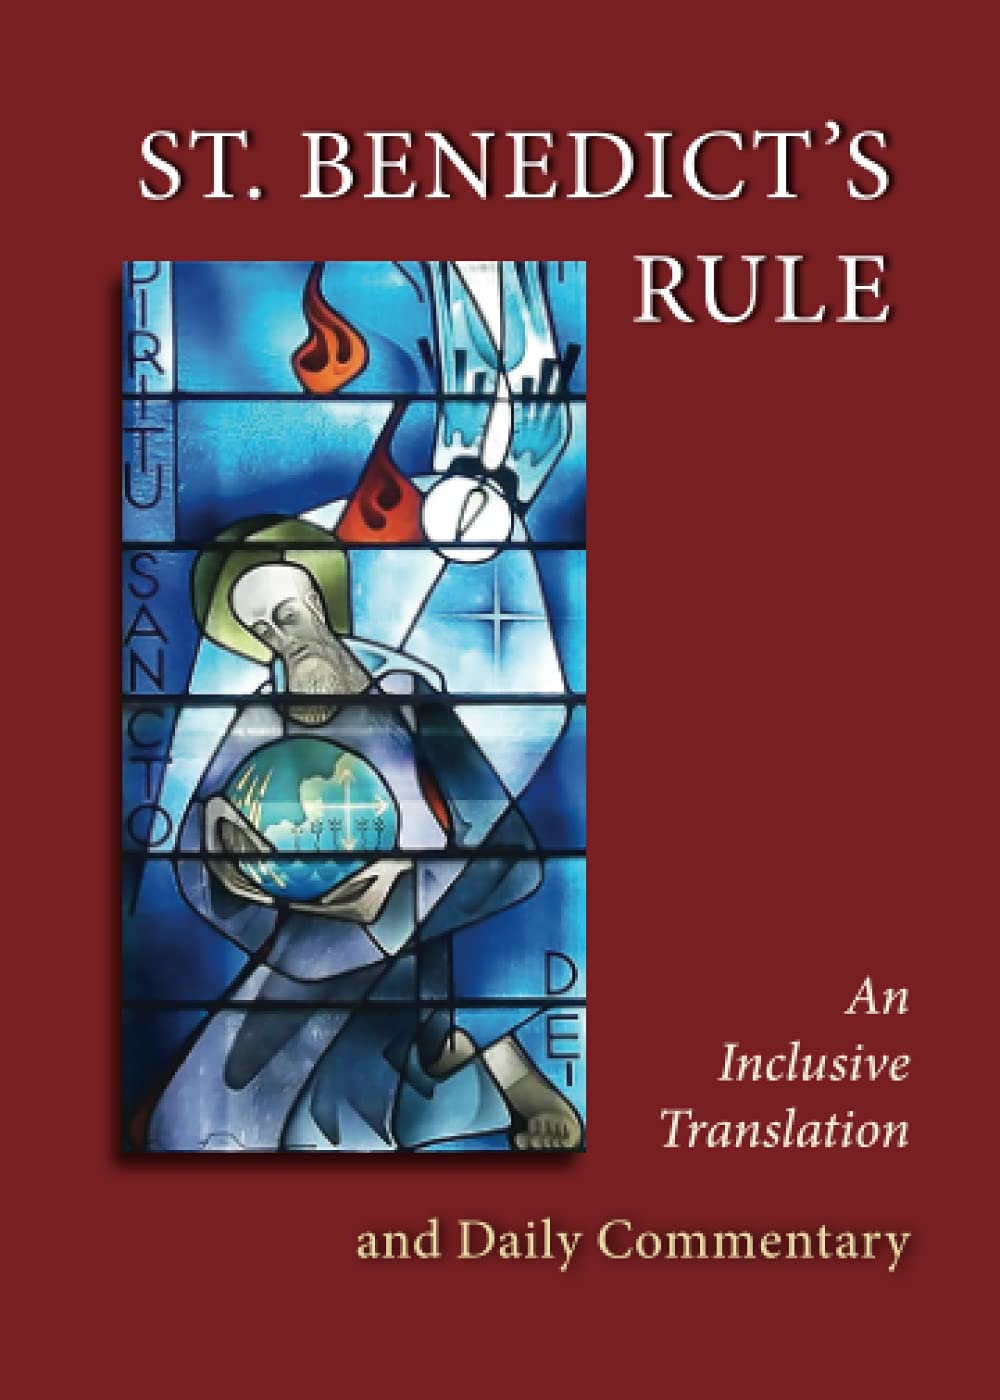 Sutera, Judith: St. Benedict's Rule: An Inclusive Translation and Daily Commentary